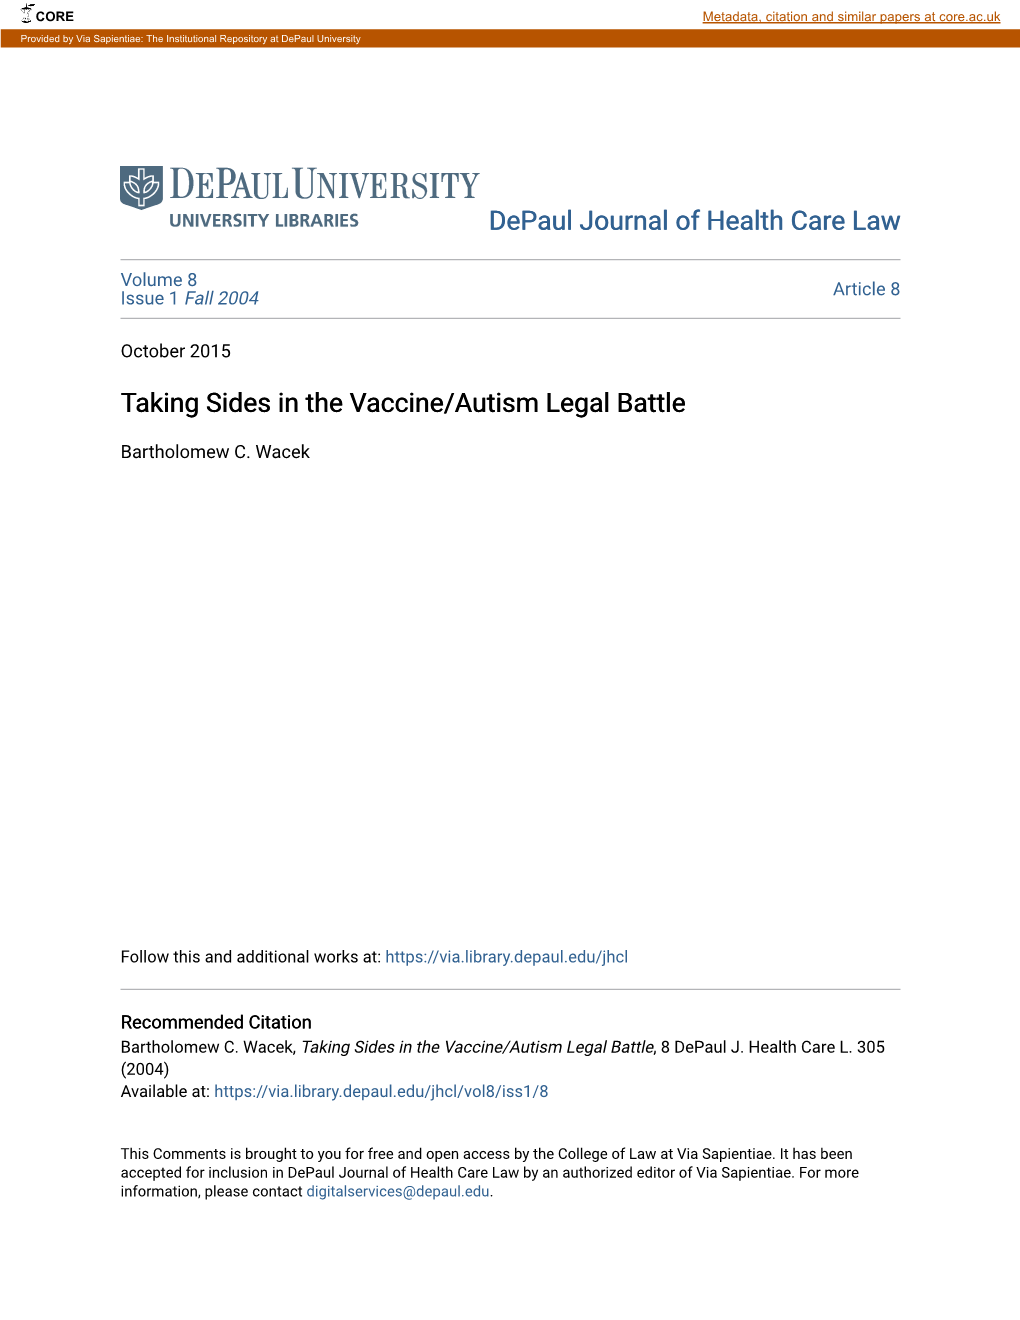 Taking Sides in the Vaccine/Autism Legal Battle